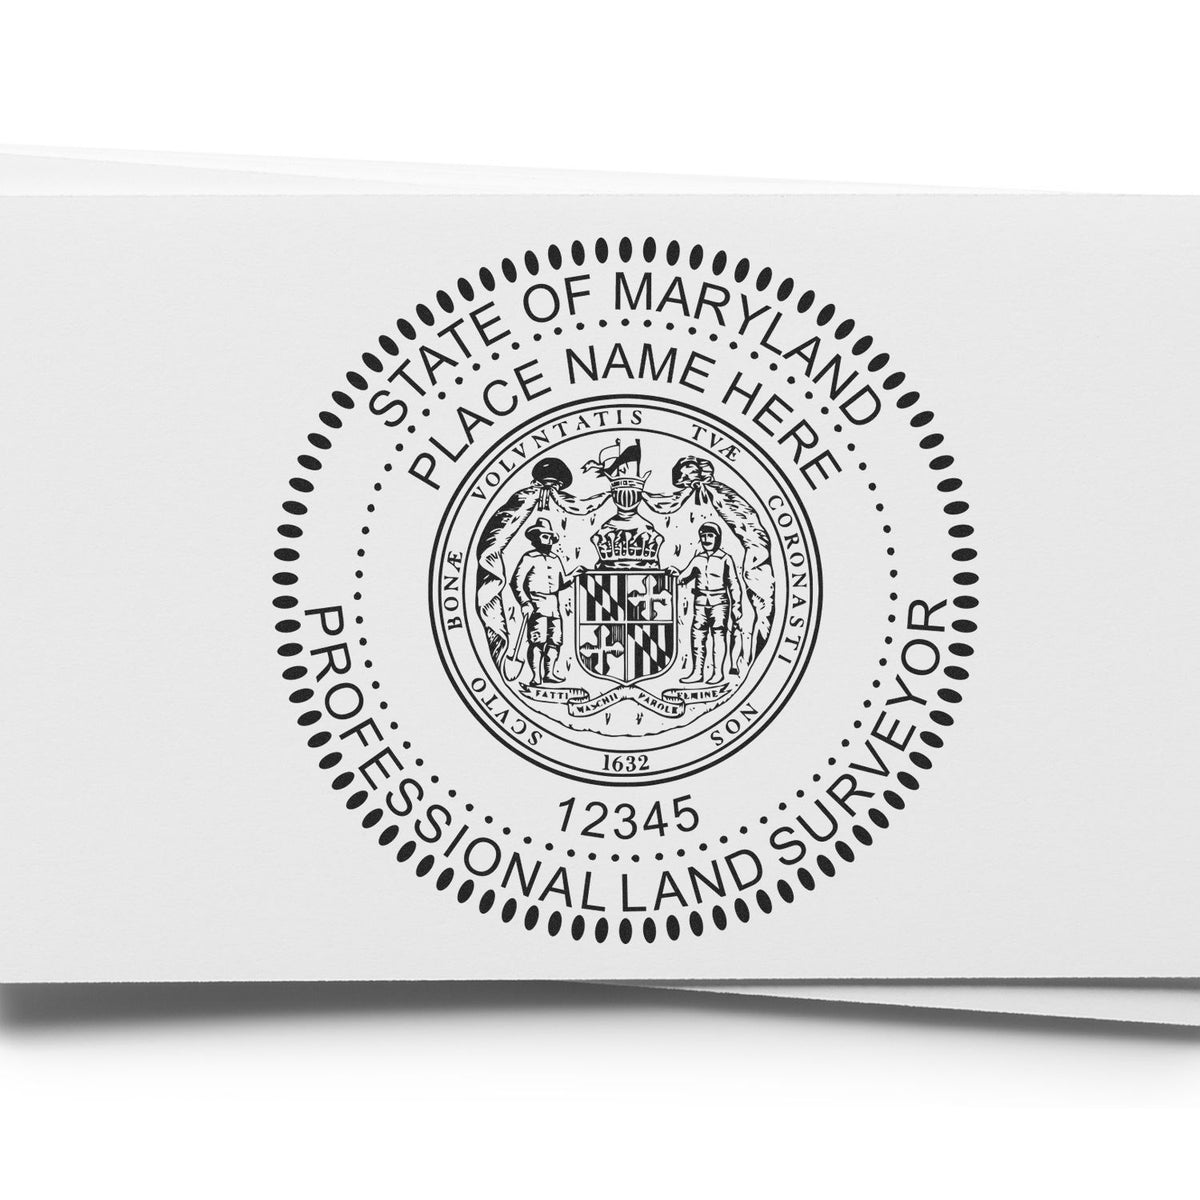 A lifestyle photo showing a stamped image of the Slim Pre-Inked Maryland Land Surveyor Seal Stamp on a piece of paper